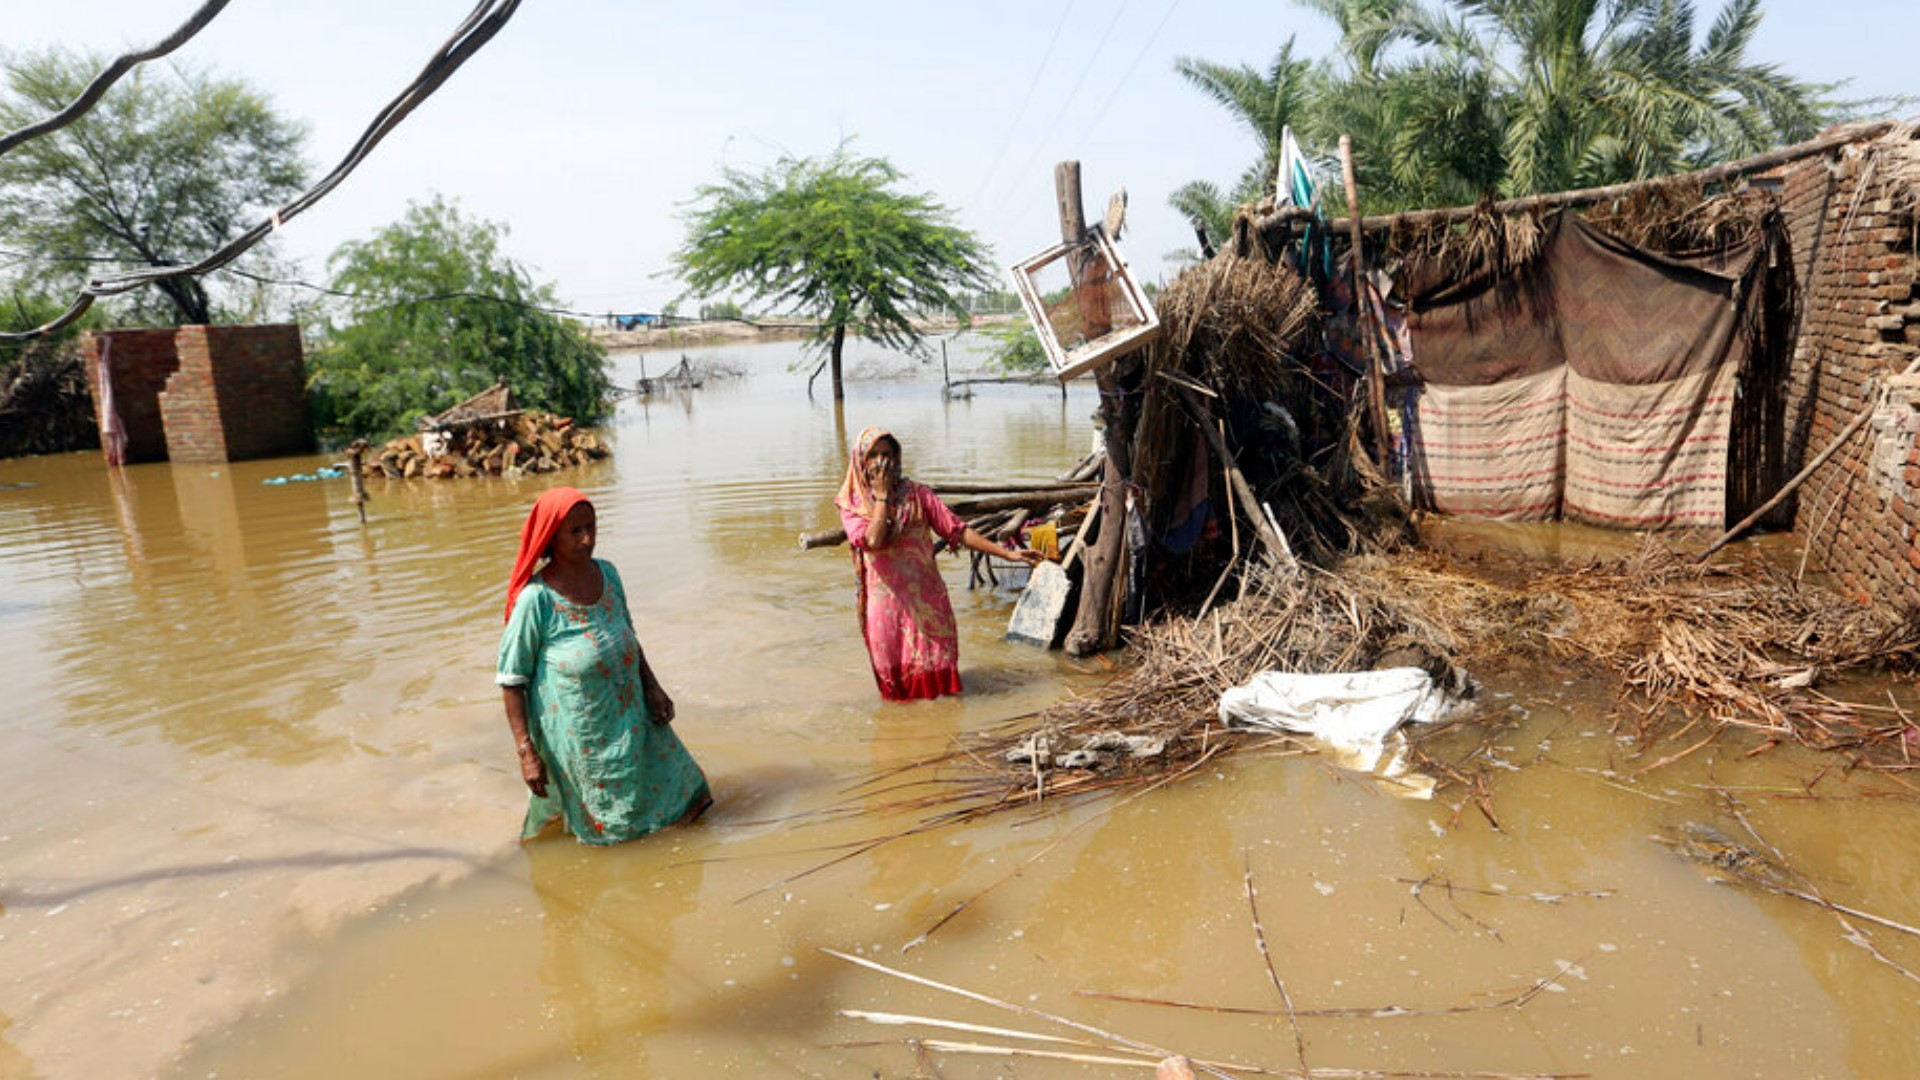 The UN and Pakistan have asked for $160 million in emergency funding to help millions affected by record-breaking floods brought on by unprecedented monsoon rains.